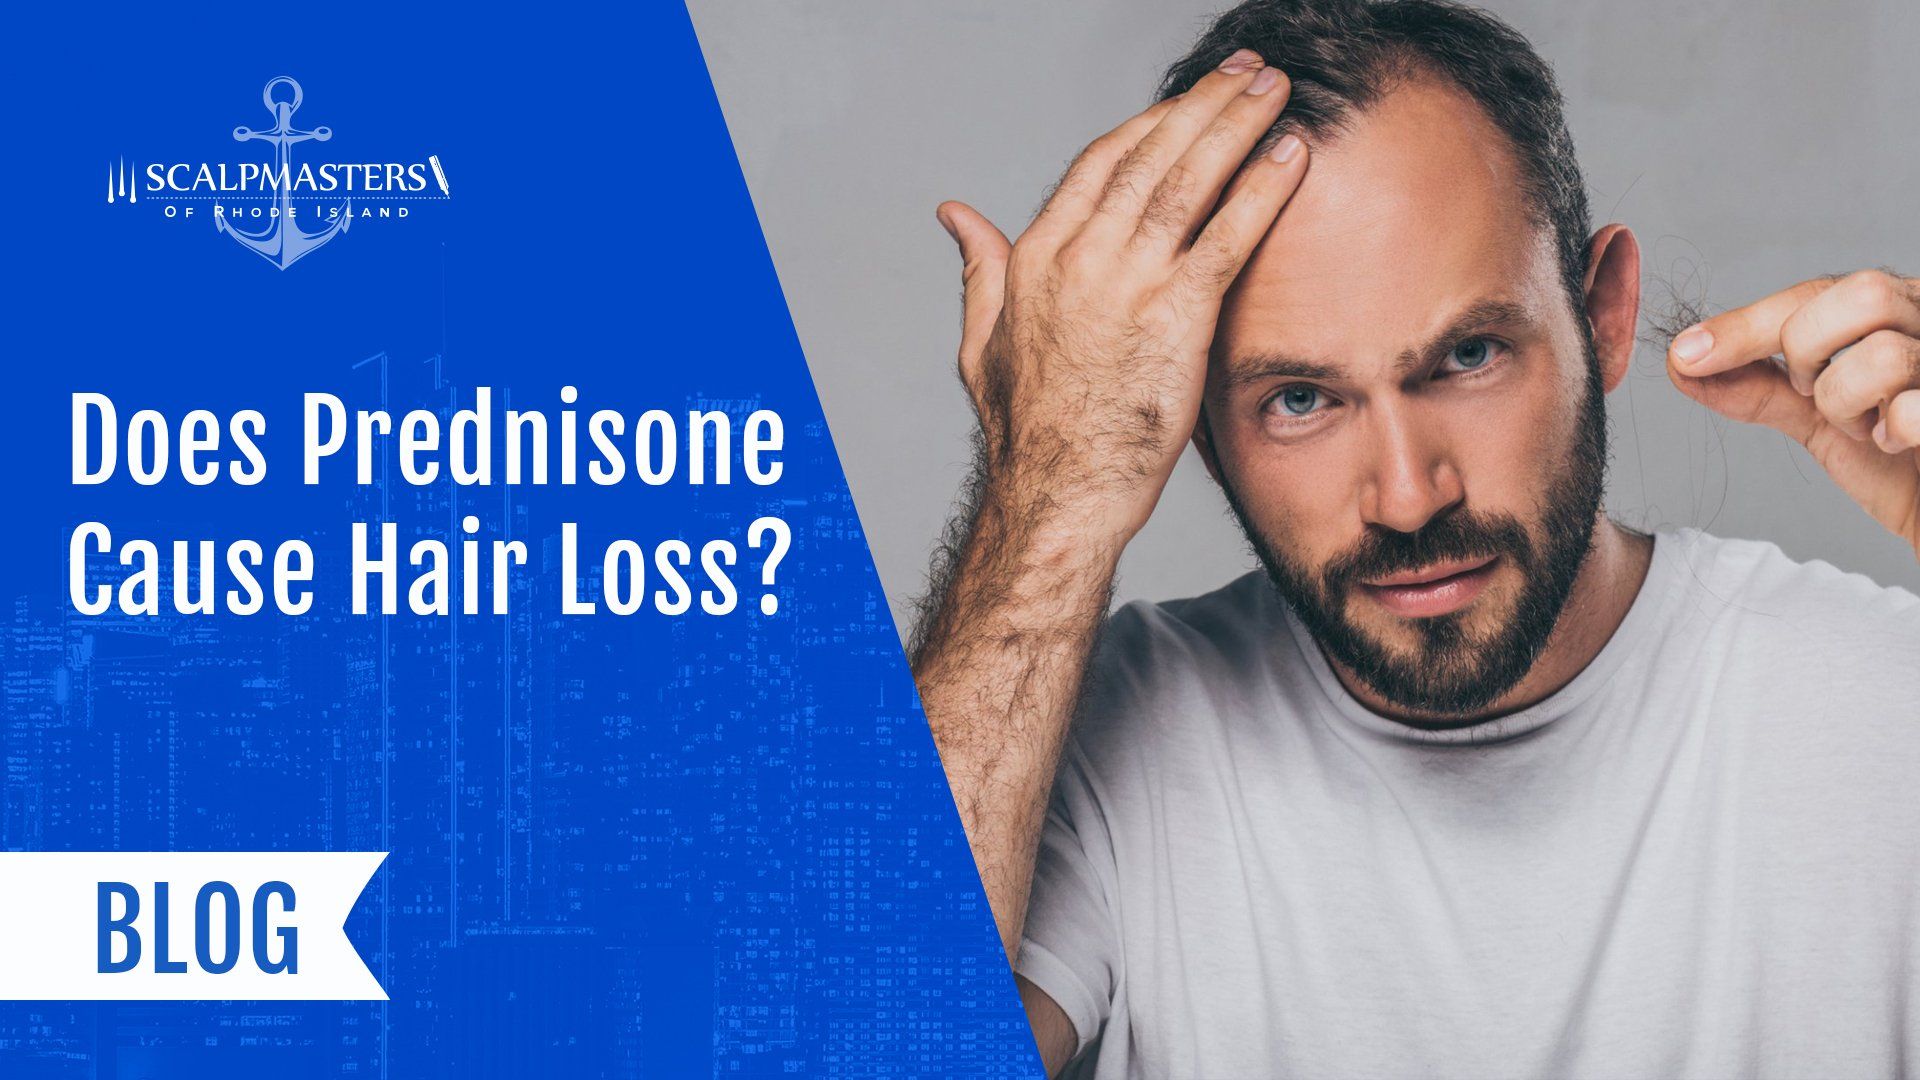 Does Prednisone Cause Hair Loss?